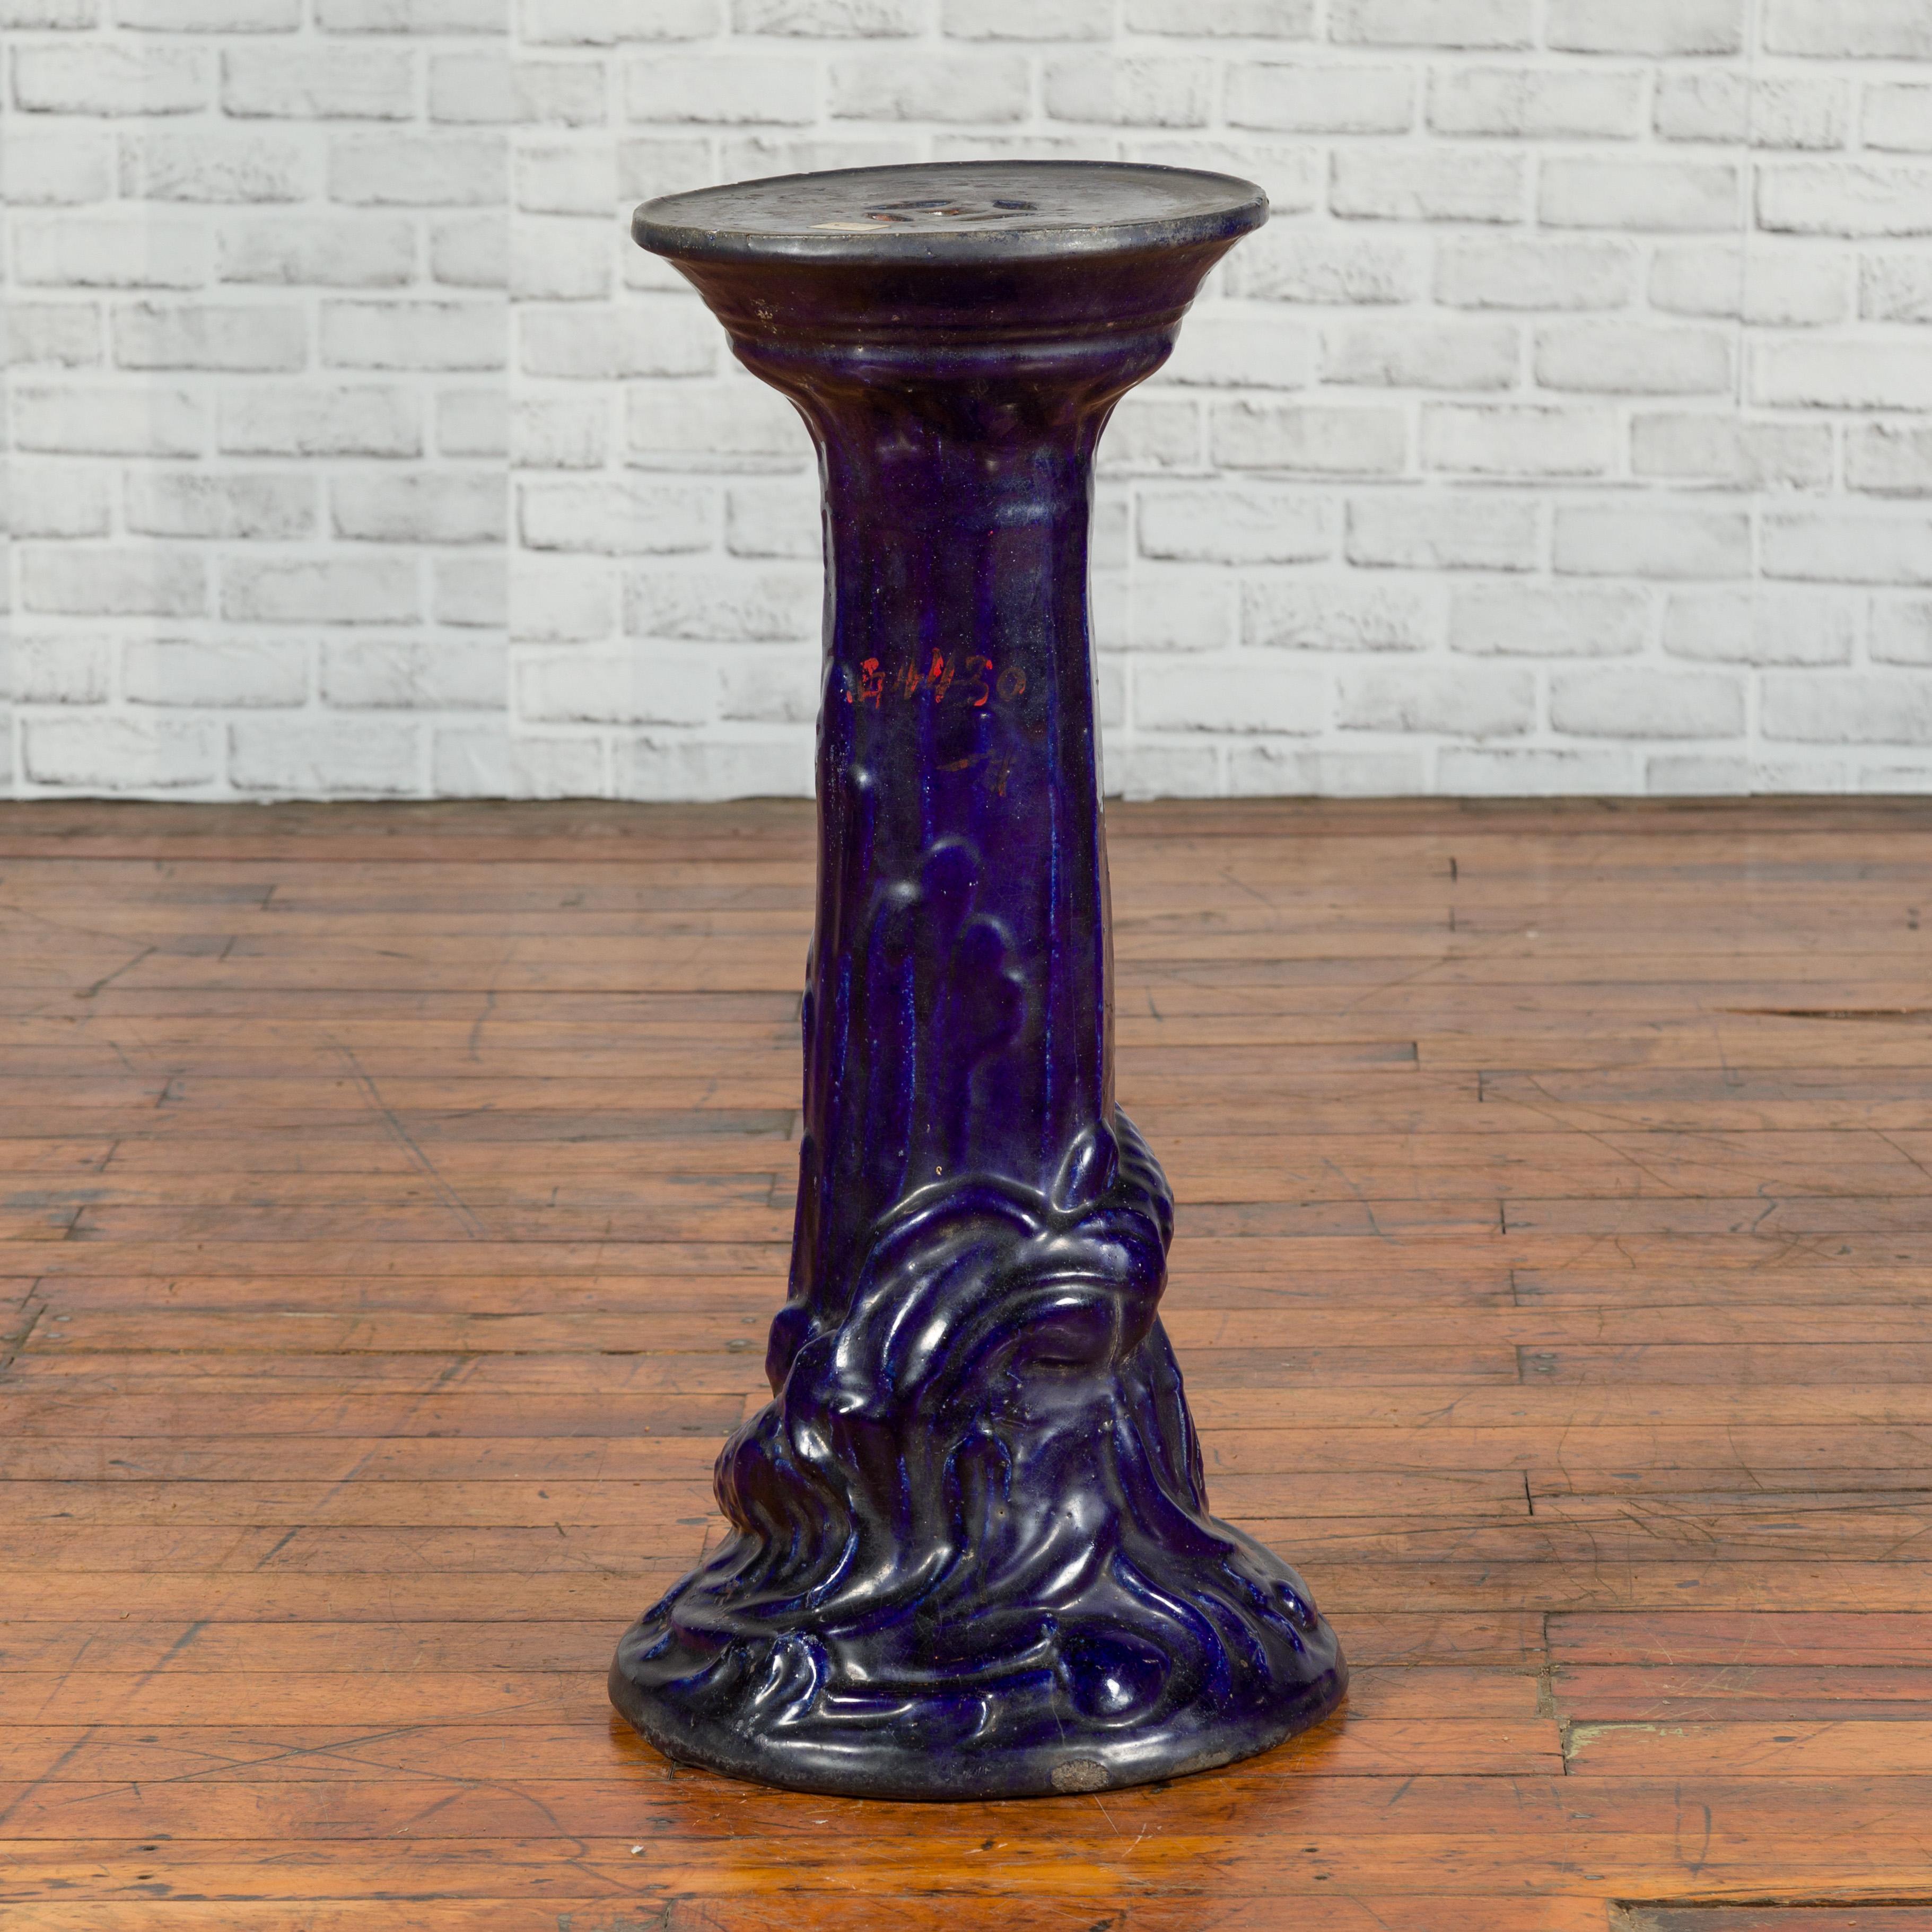 A Chinese antique dark blue glazed pedestal stand with raised motifs. Boasting a lovely dark blue glazed patina, this plant stand features a circular top pierced with small geometric openings, resting above a pedestal discreetly accented with raised